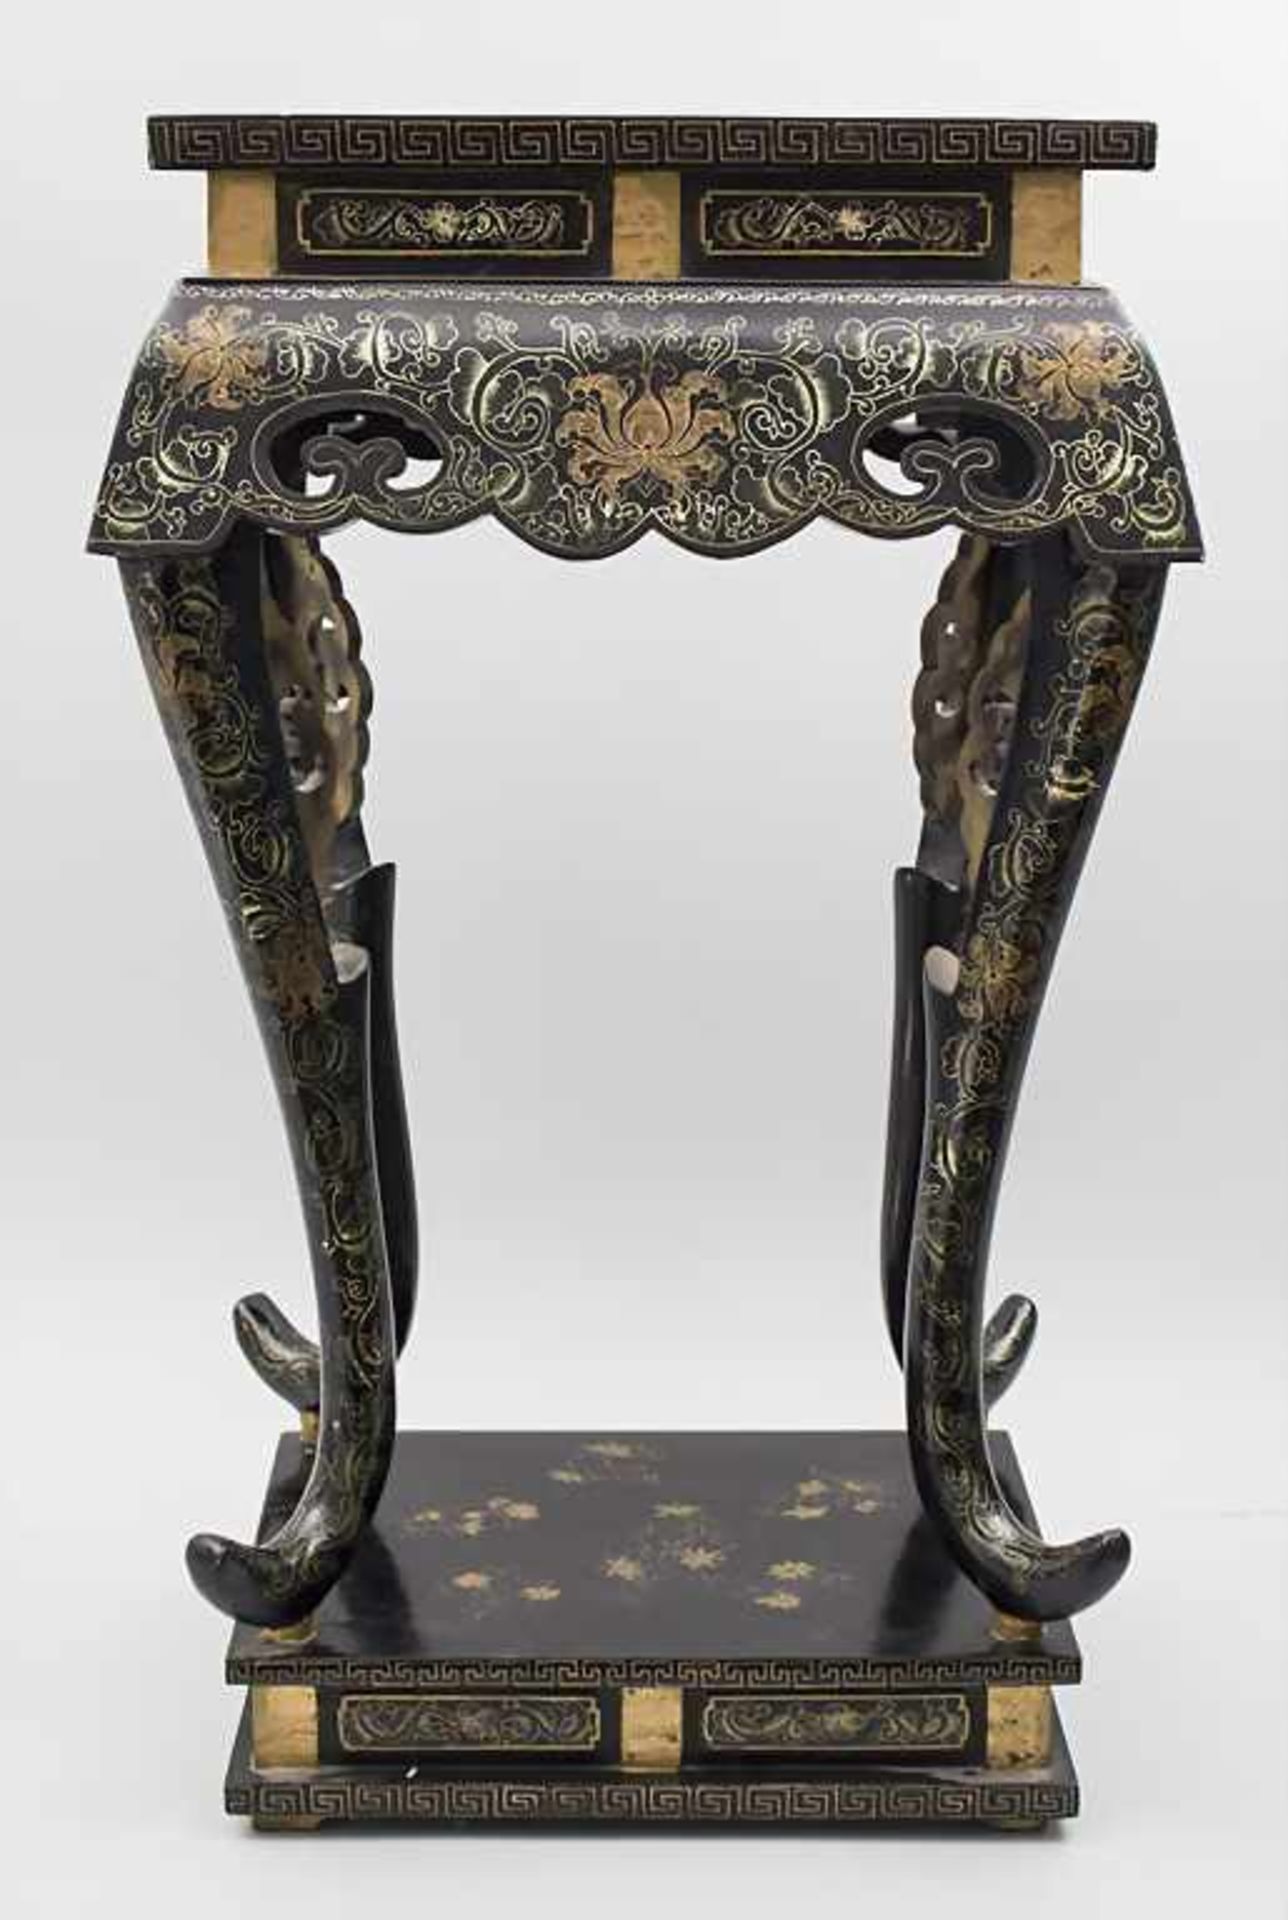 Lacktisch / A lacquer table, China, 20. Jh. - Image 4 of 8